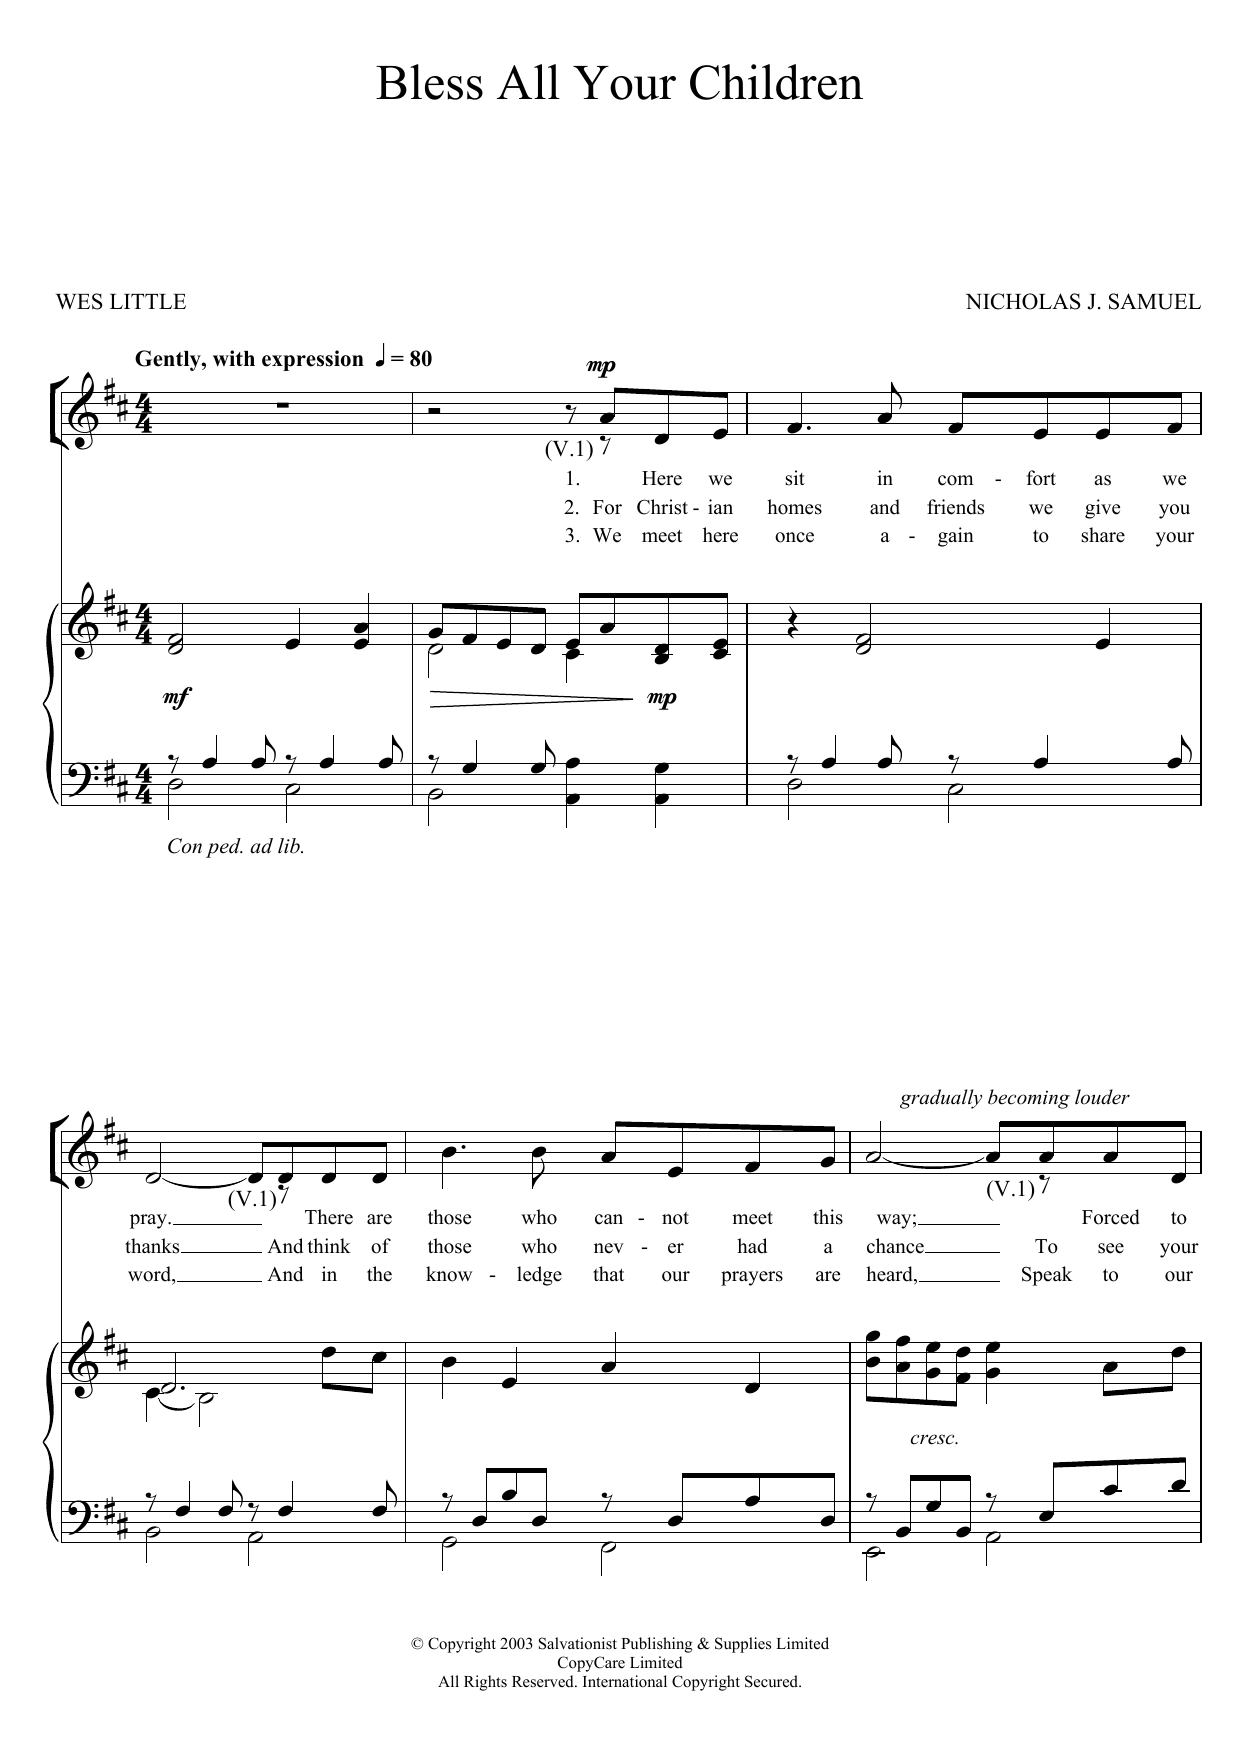 Download The Salvation Army Bless All Your Children Sheet Music